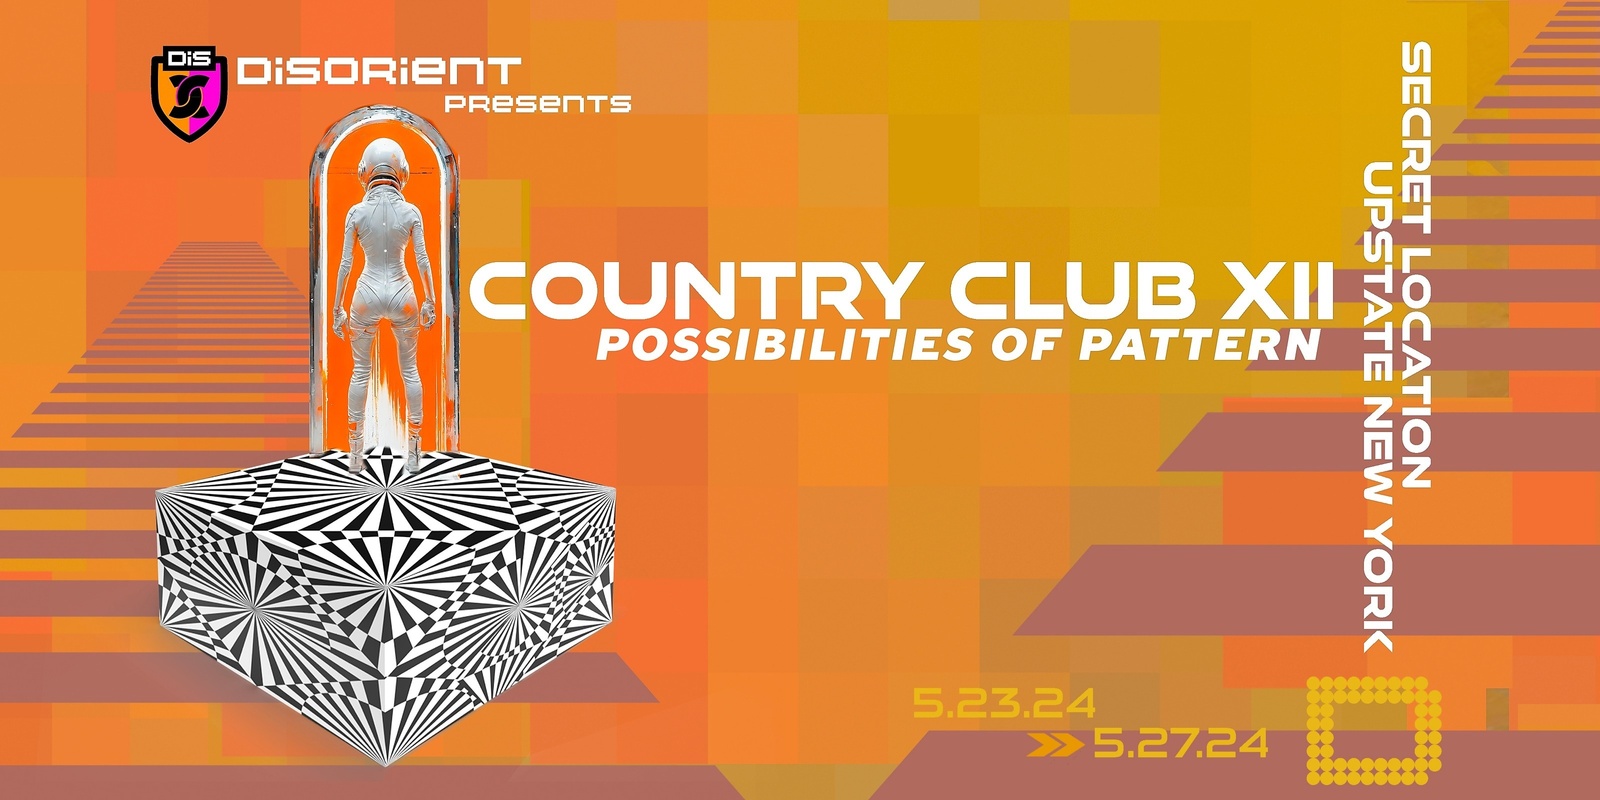 Banner image for Disorient presents: COUNTRY CLUB XII - POSSIBILITIES OF PATTERN